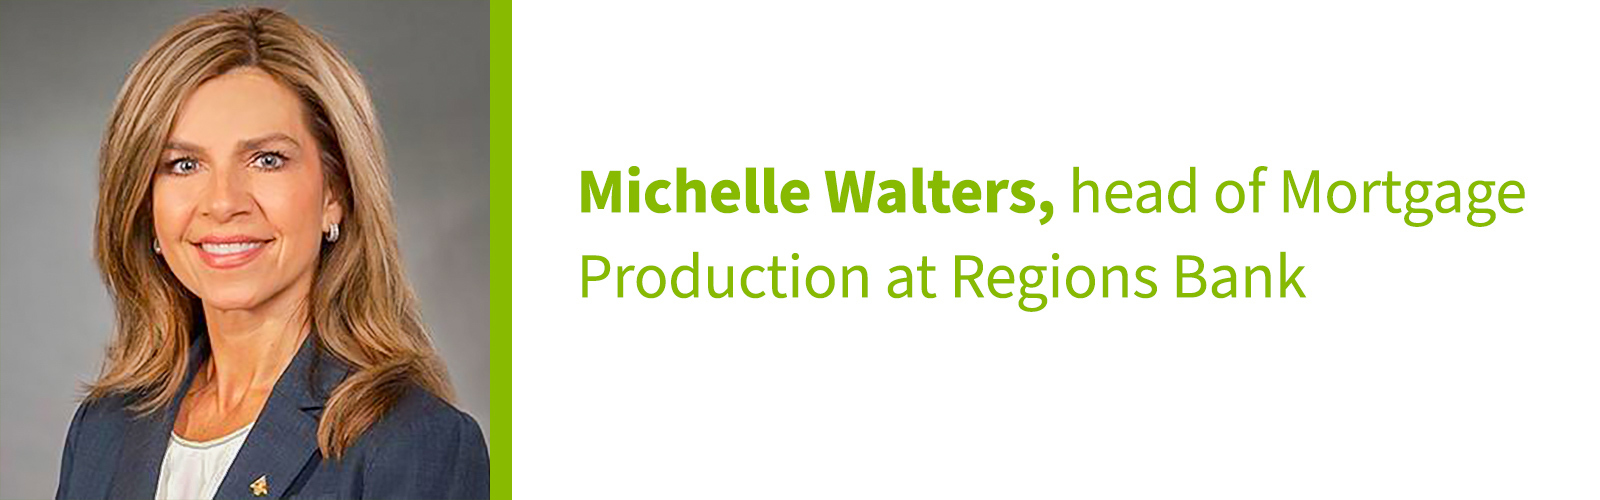 Michelle Walters, head of Mortgage Production at Regions Bank